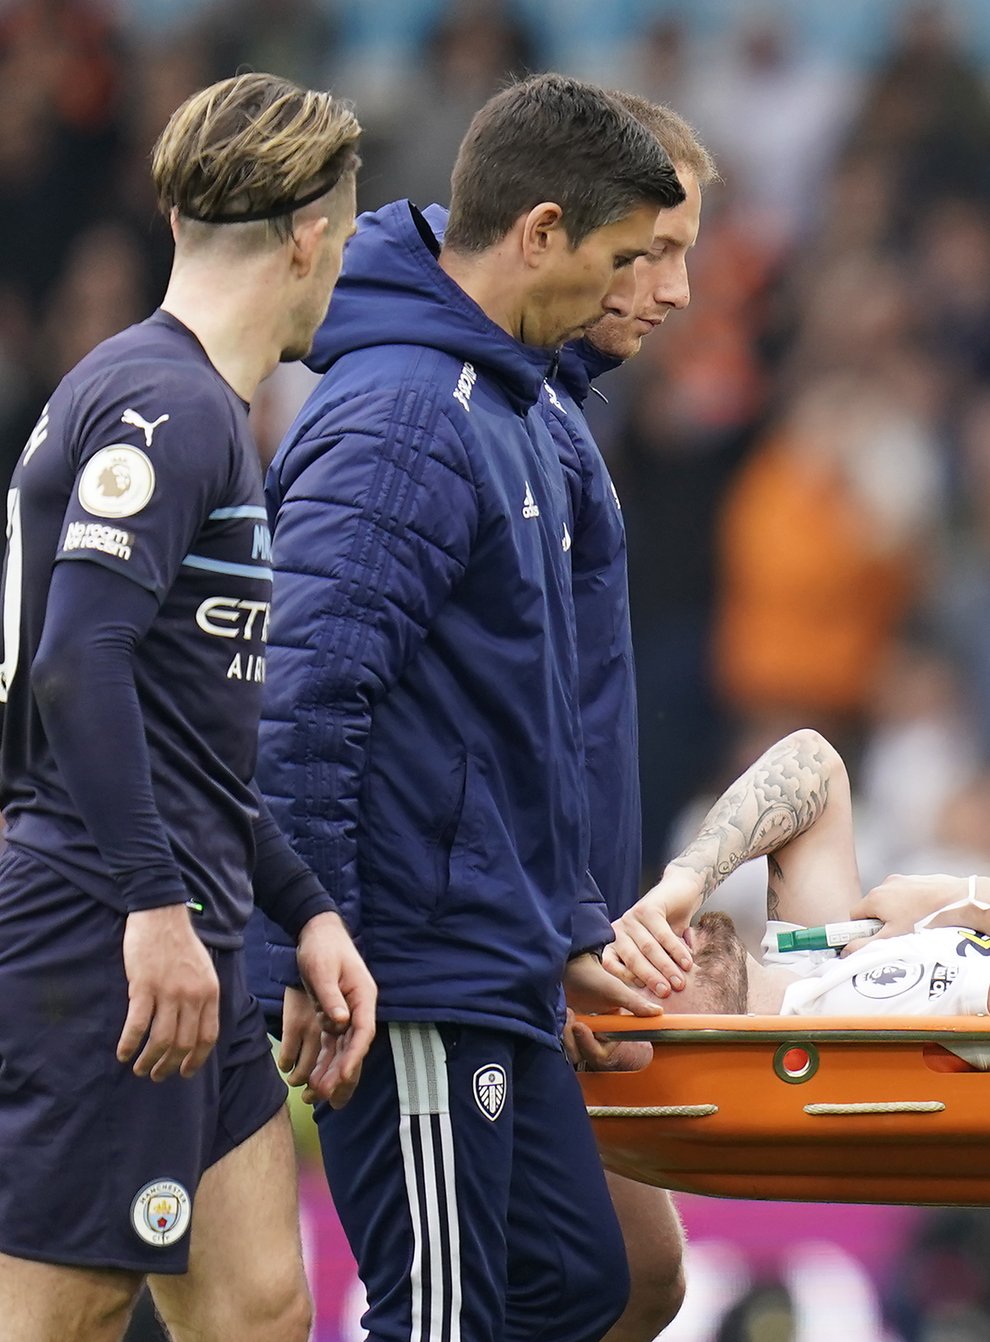 Stuart Dallas has had successful surgery after breaking his leg in Leeds’ home defeat to Manchester City last week (Danny Lawson/PA)